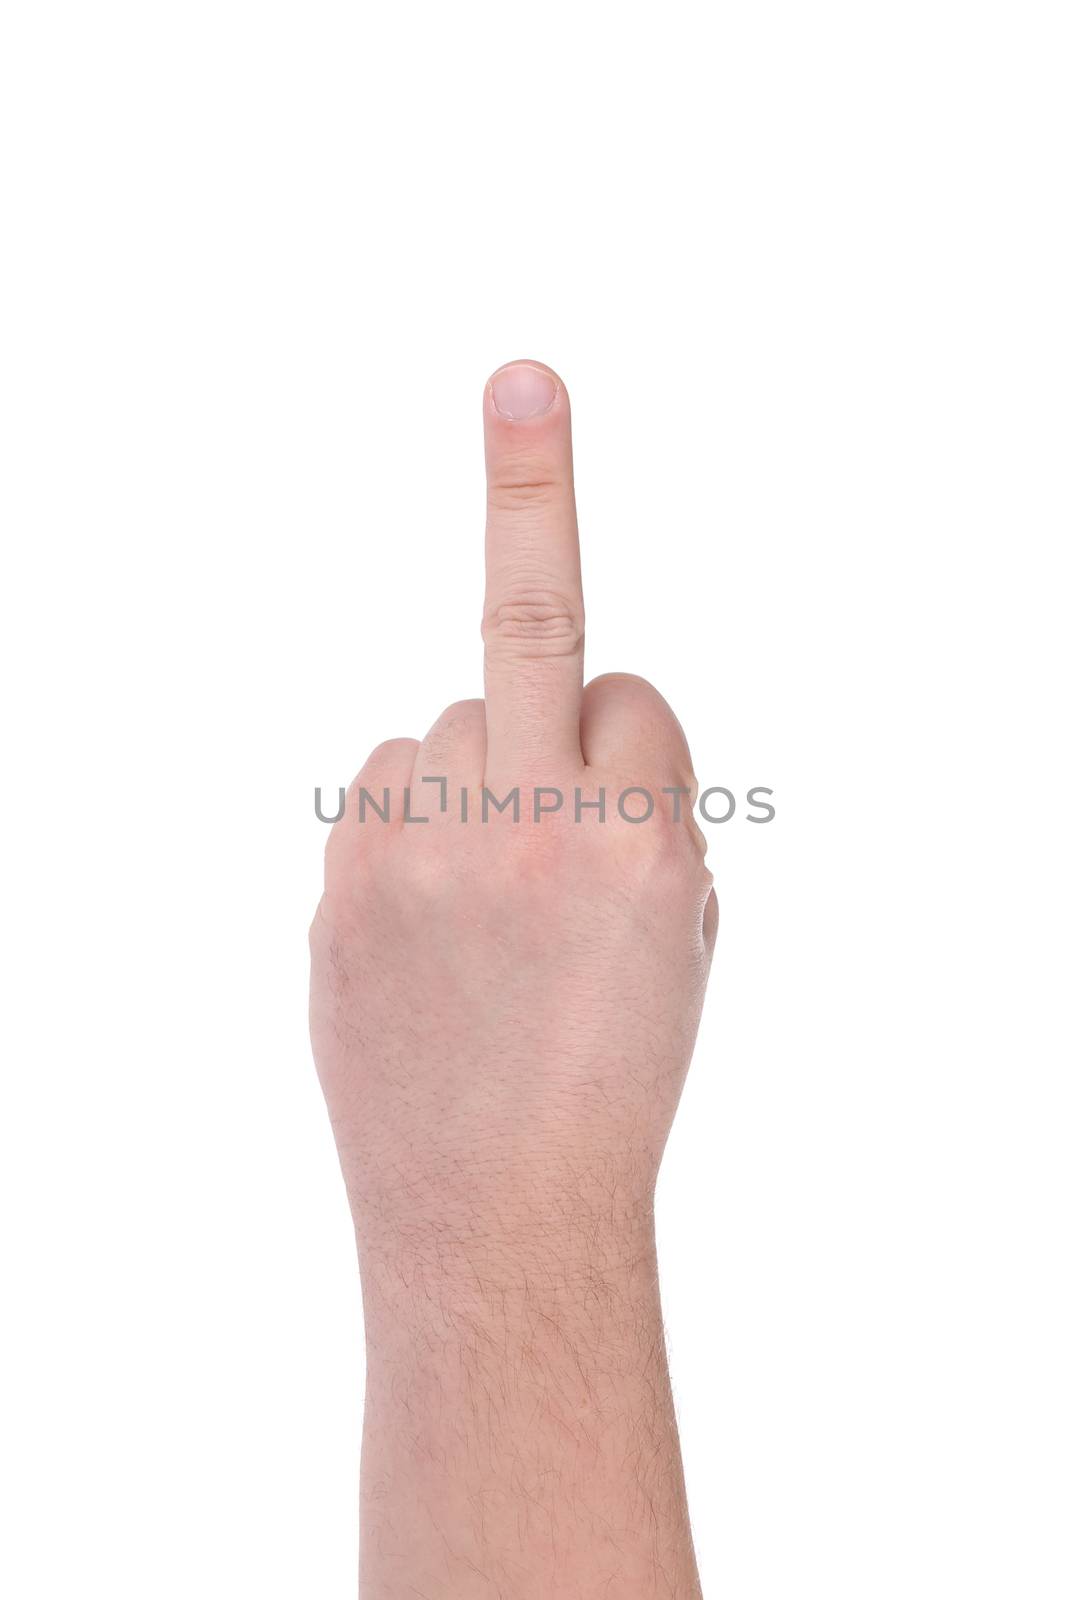 Hand shows middle finger. Isolated on a white background.